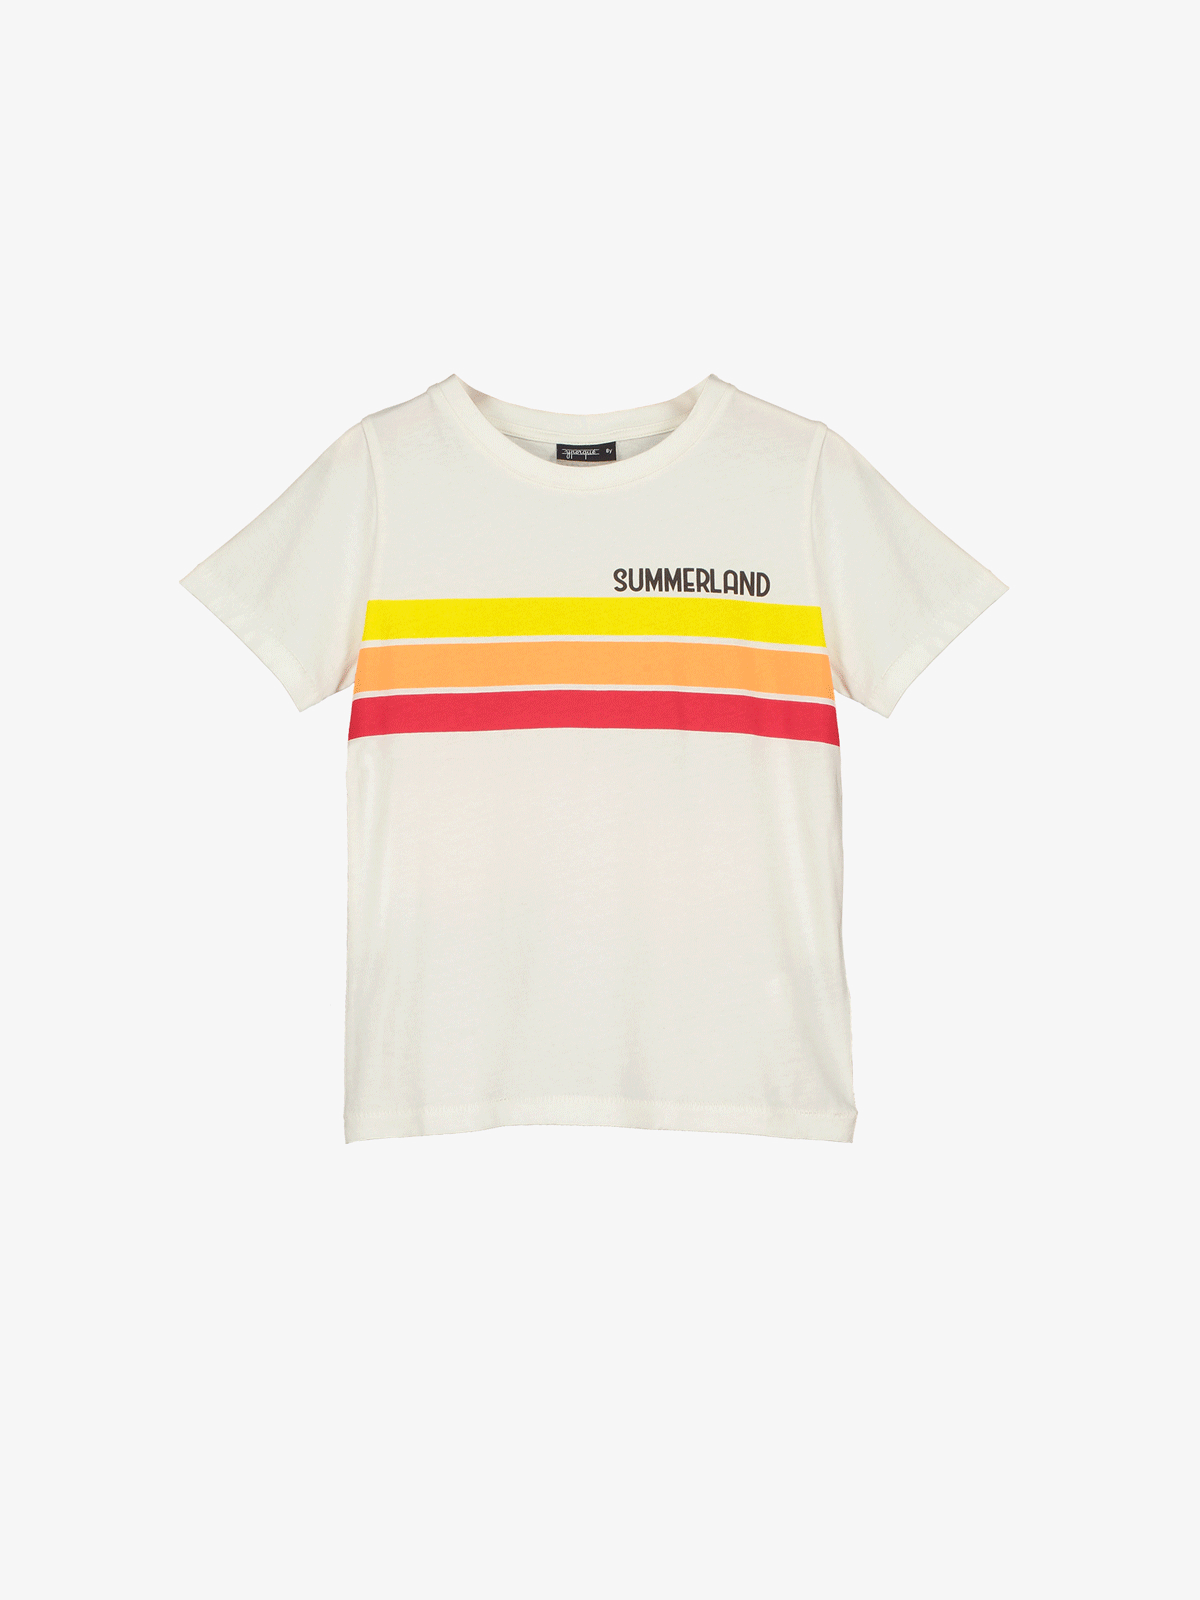 SUNSET FRONT & BACK TEE